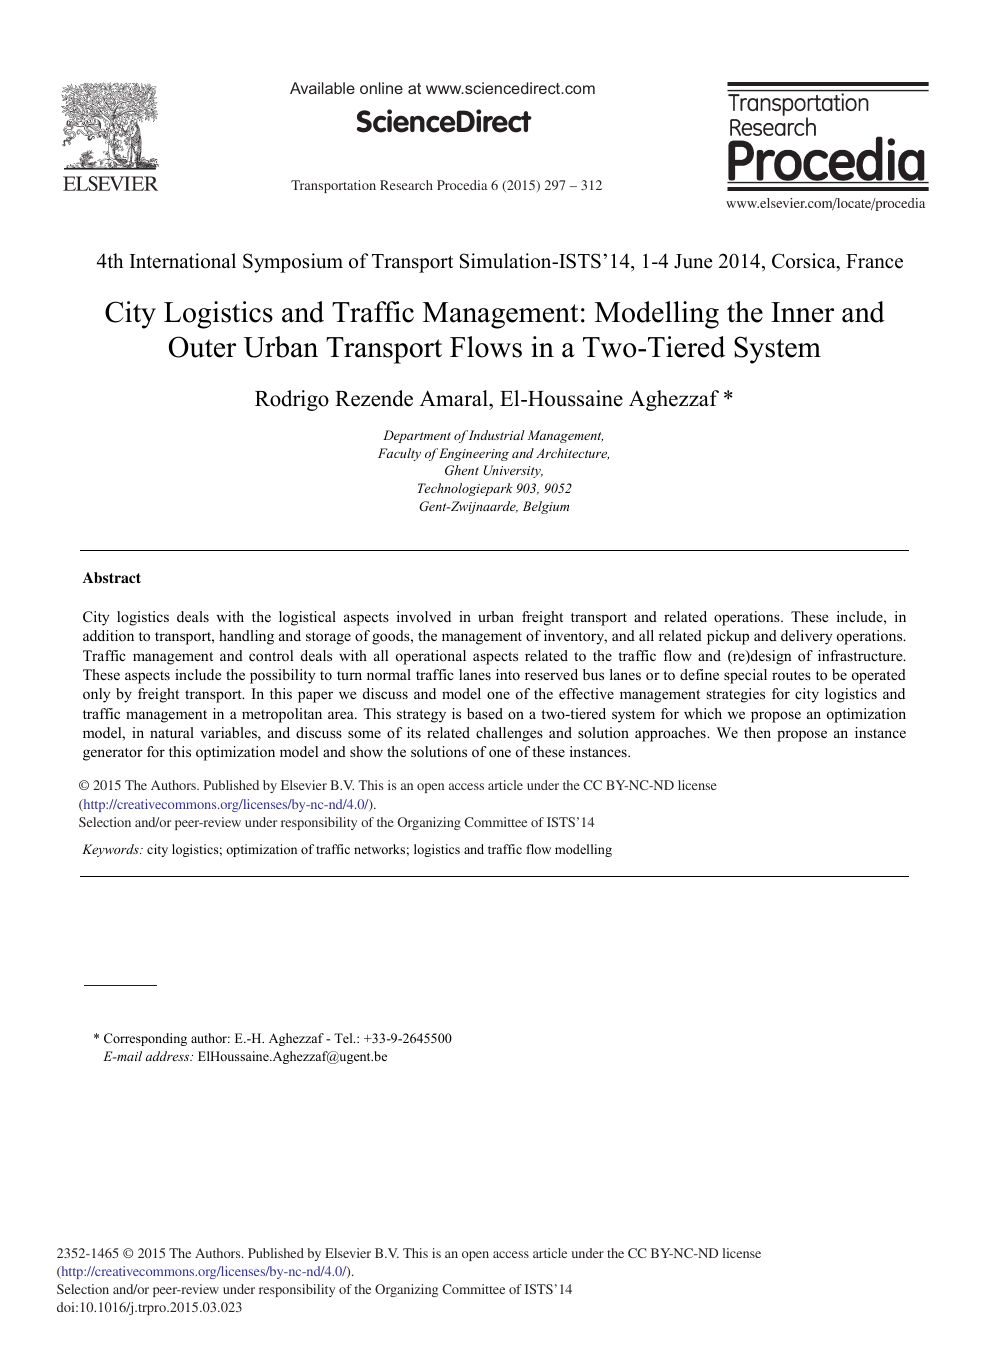 City Logistics And Traffic Management Modelling The Inner And Outer Urban Transport Flows In A Two Tiered System Topic Of Research Paper In Economics And Business Download Scholarly Article Pdf And Read